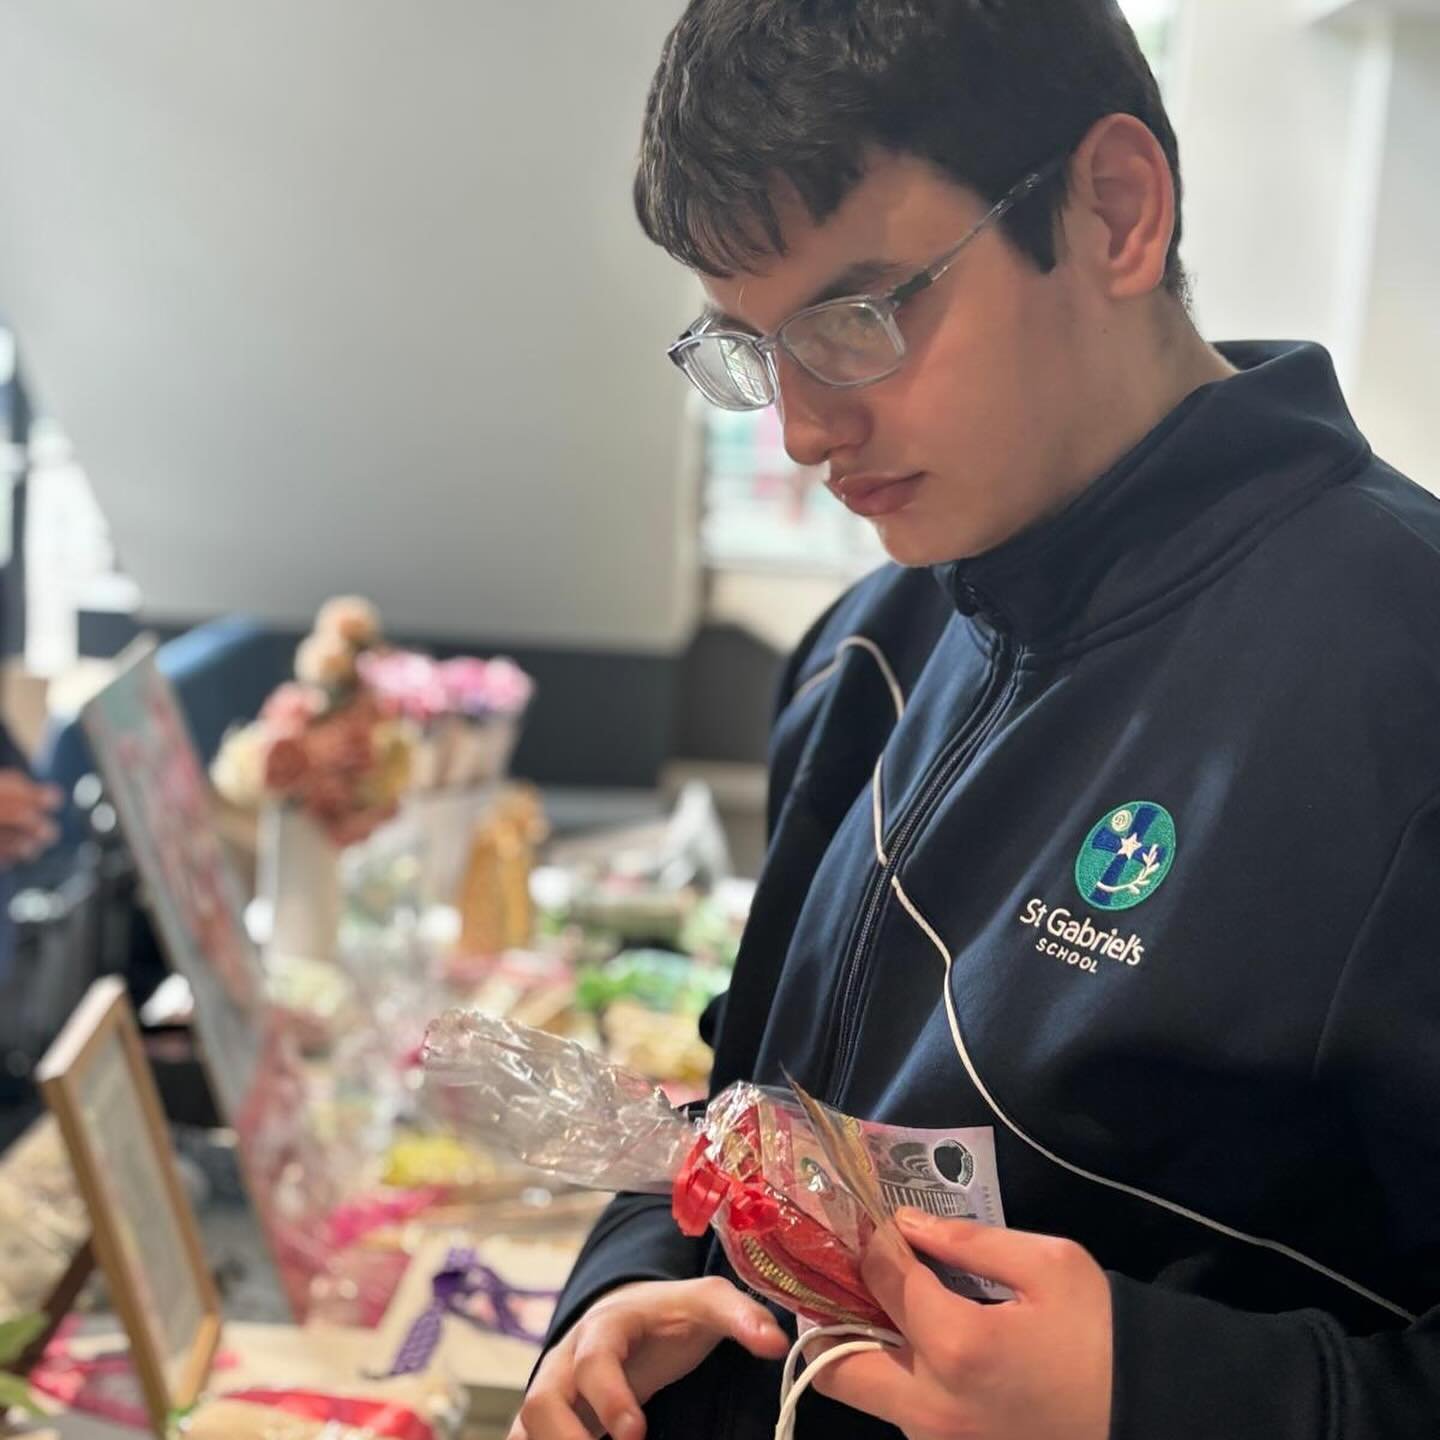 We don&rsquo;t want to ruin any surprises but all of our students put a lot of thought into buying a small gift for their mums, grandmothers and other special women in their lives at our stall this week. It&rsquo;s an excellent opportunity for studen